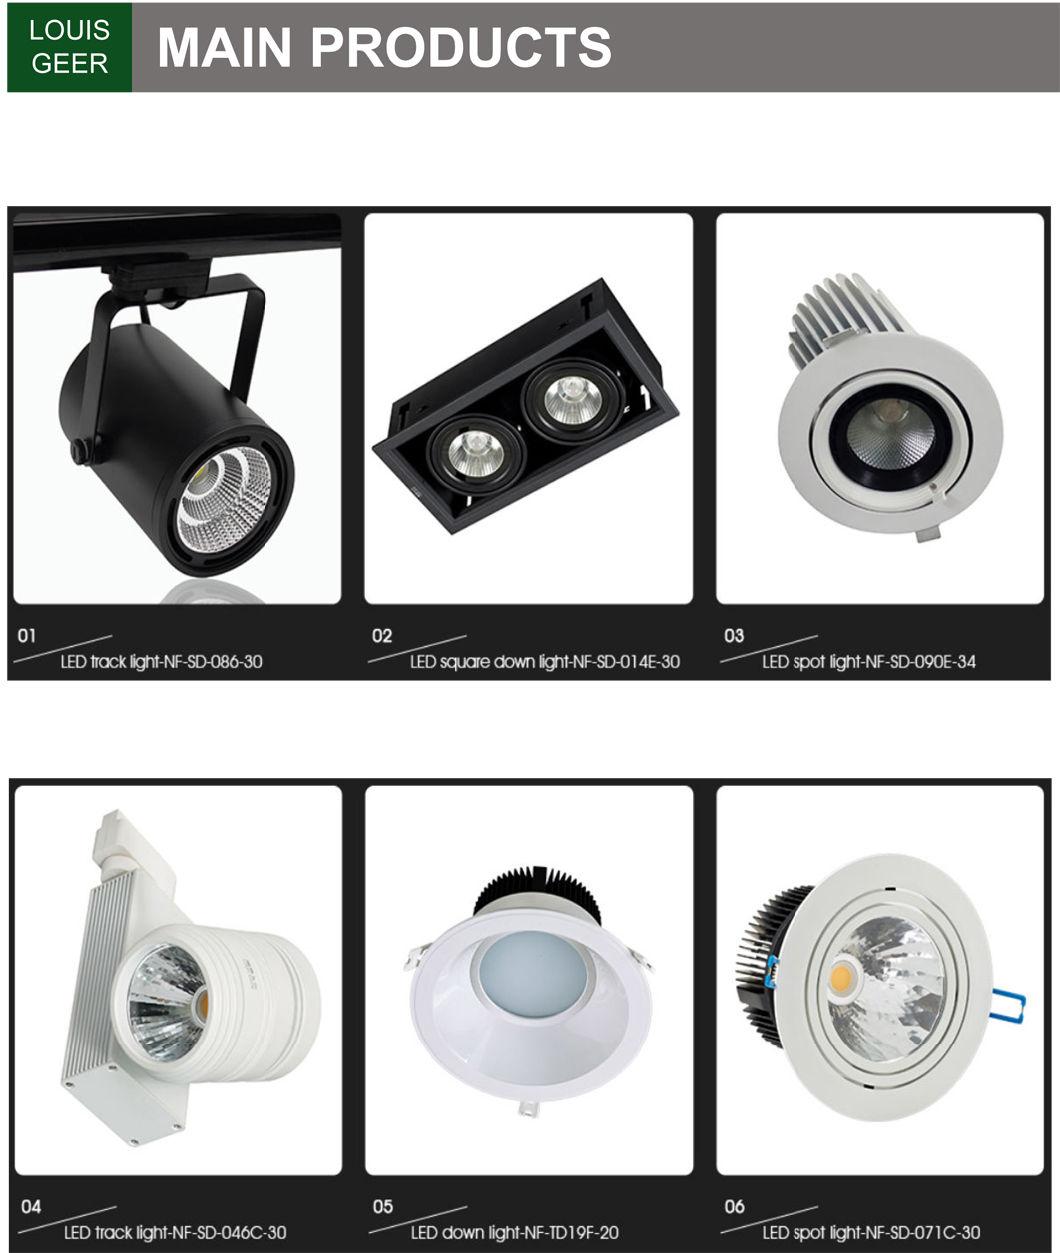 Factory Direct Supply Decorative High Quality Dimmable Recessed Anti Glare Mini COB Ceiling LED Spot Light